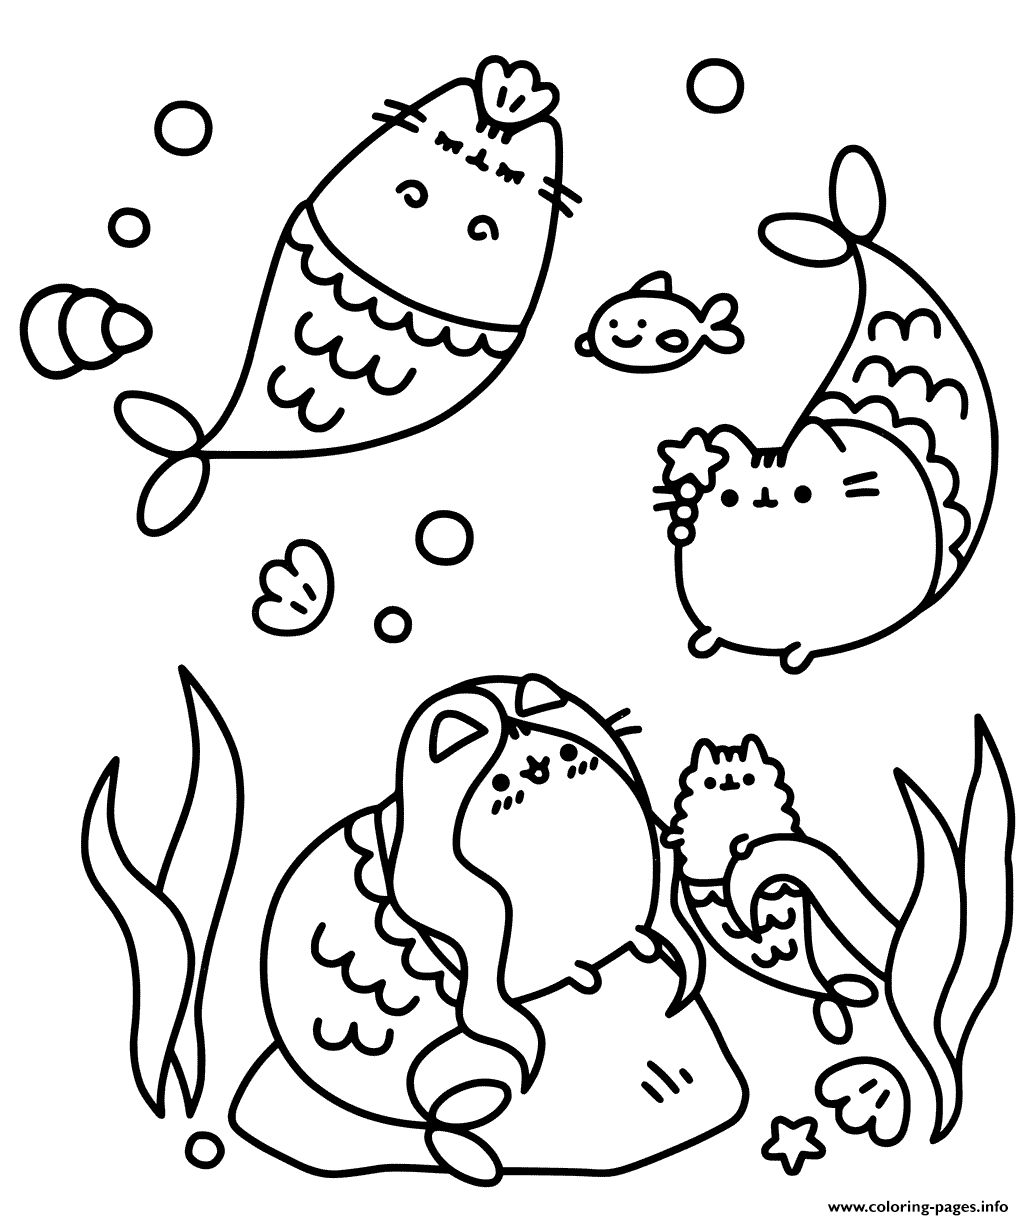 Pusheen Cat 10 For Kids Coloring Page